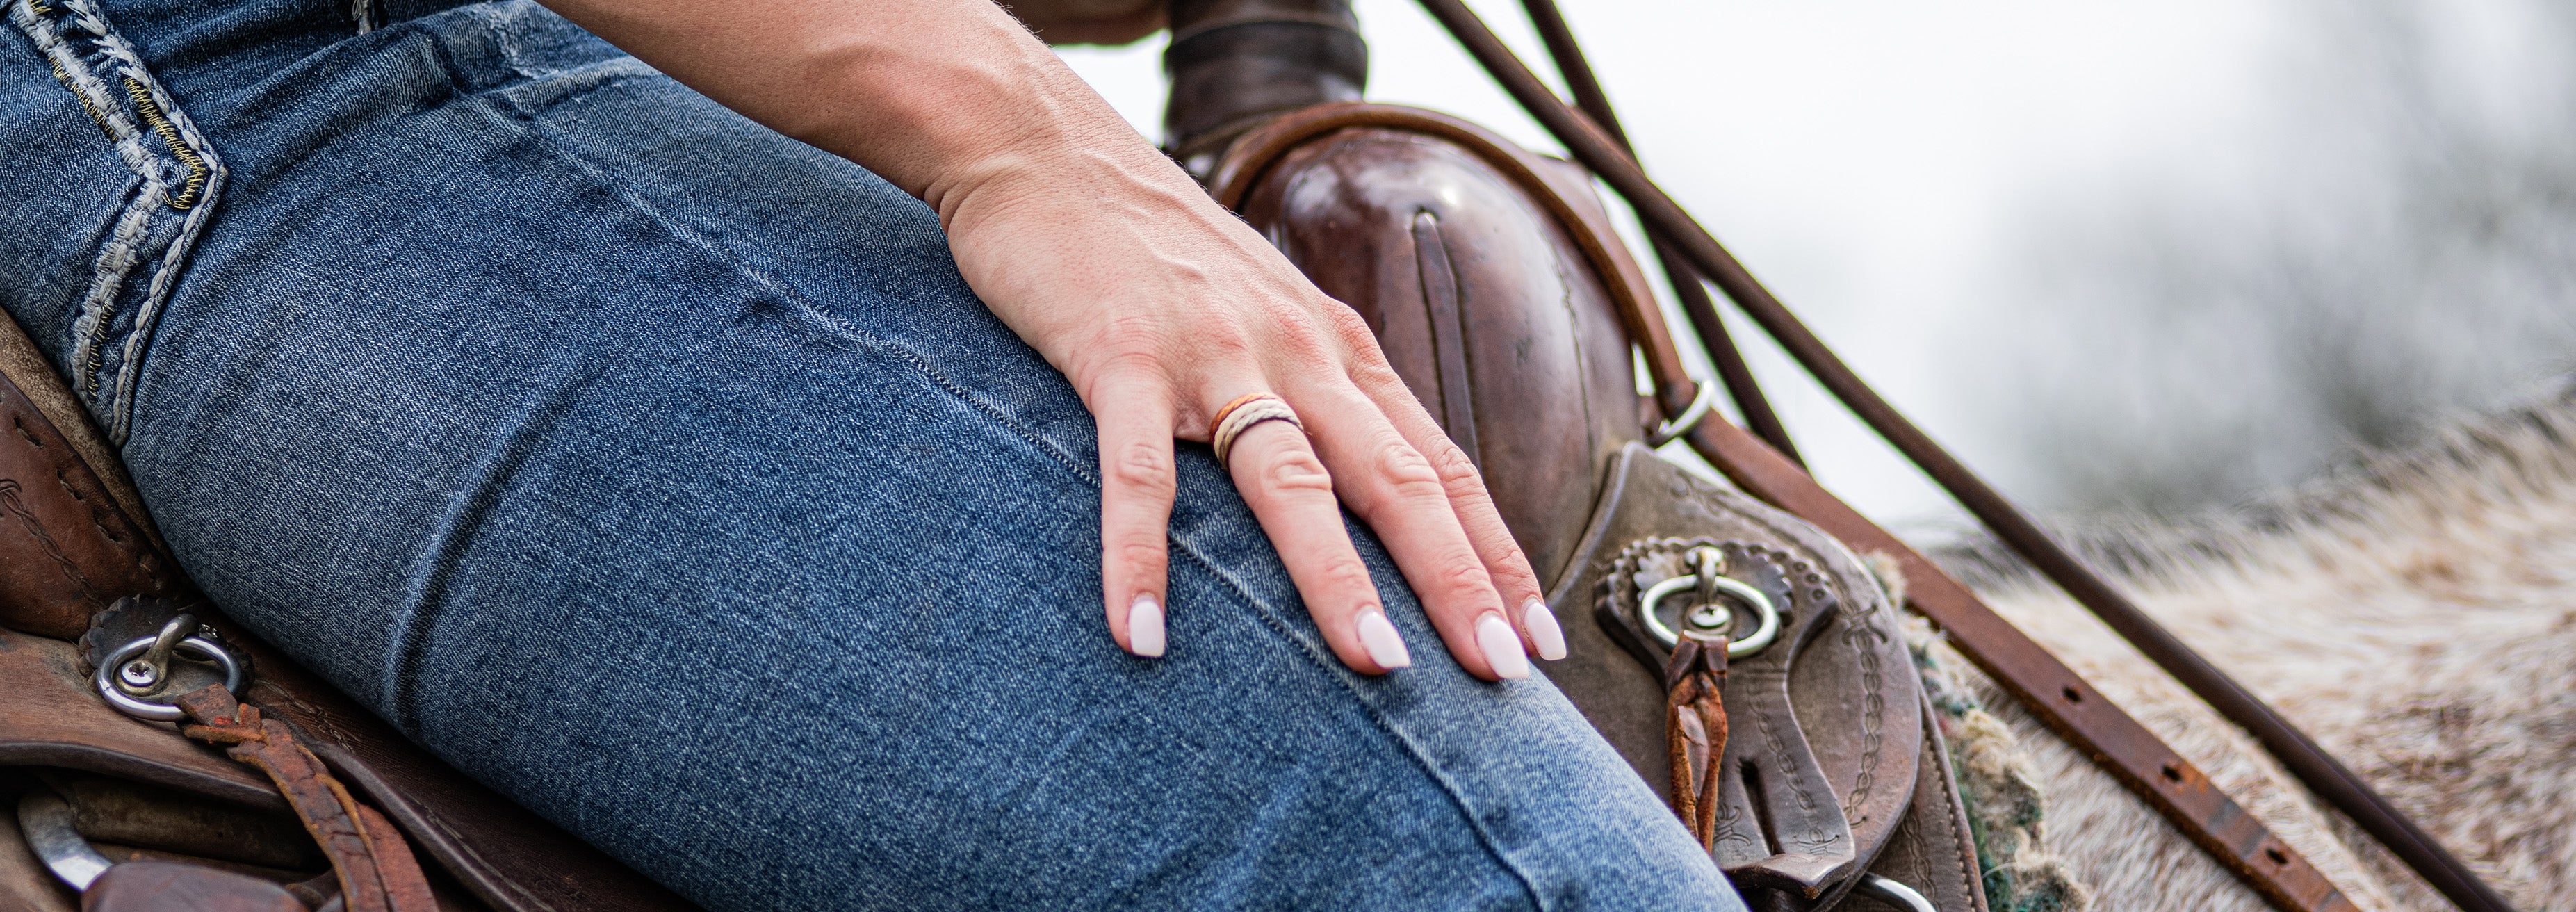 Boardwalk - Stackable Ring lifestyle image 1